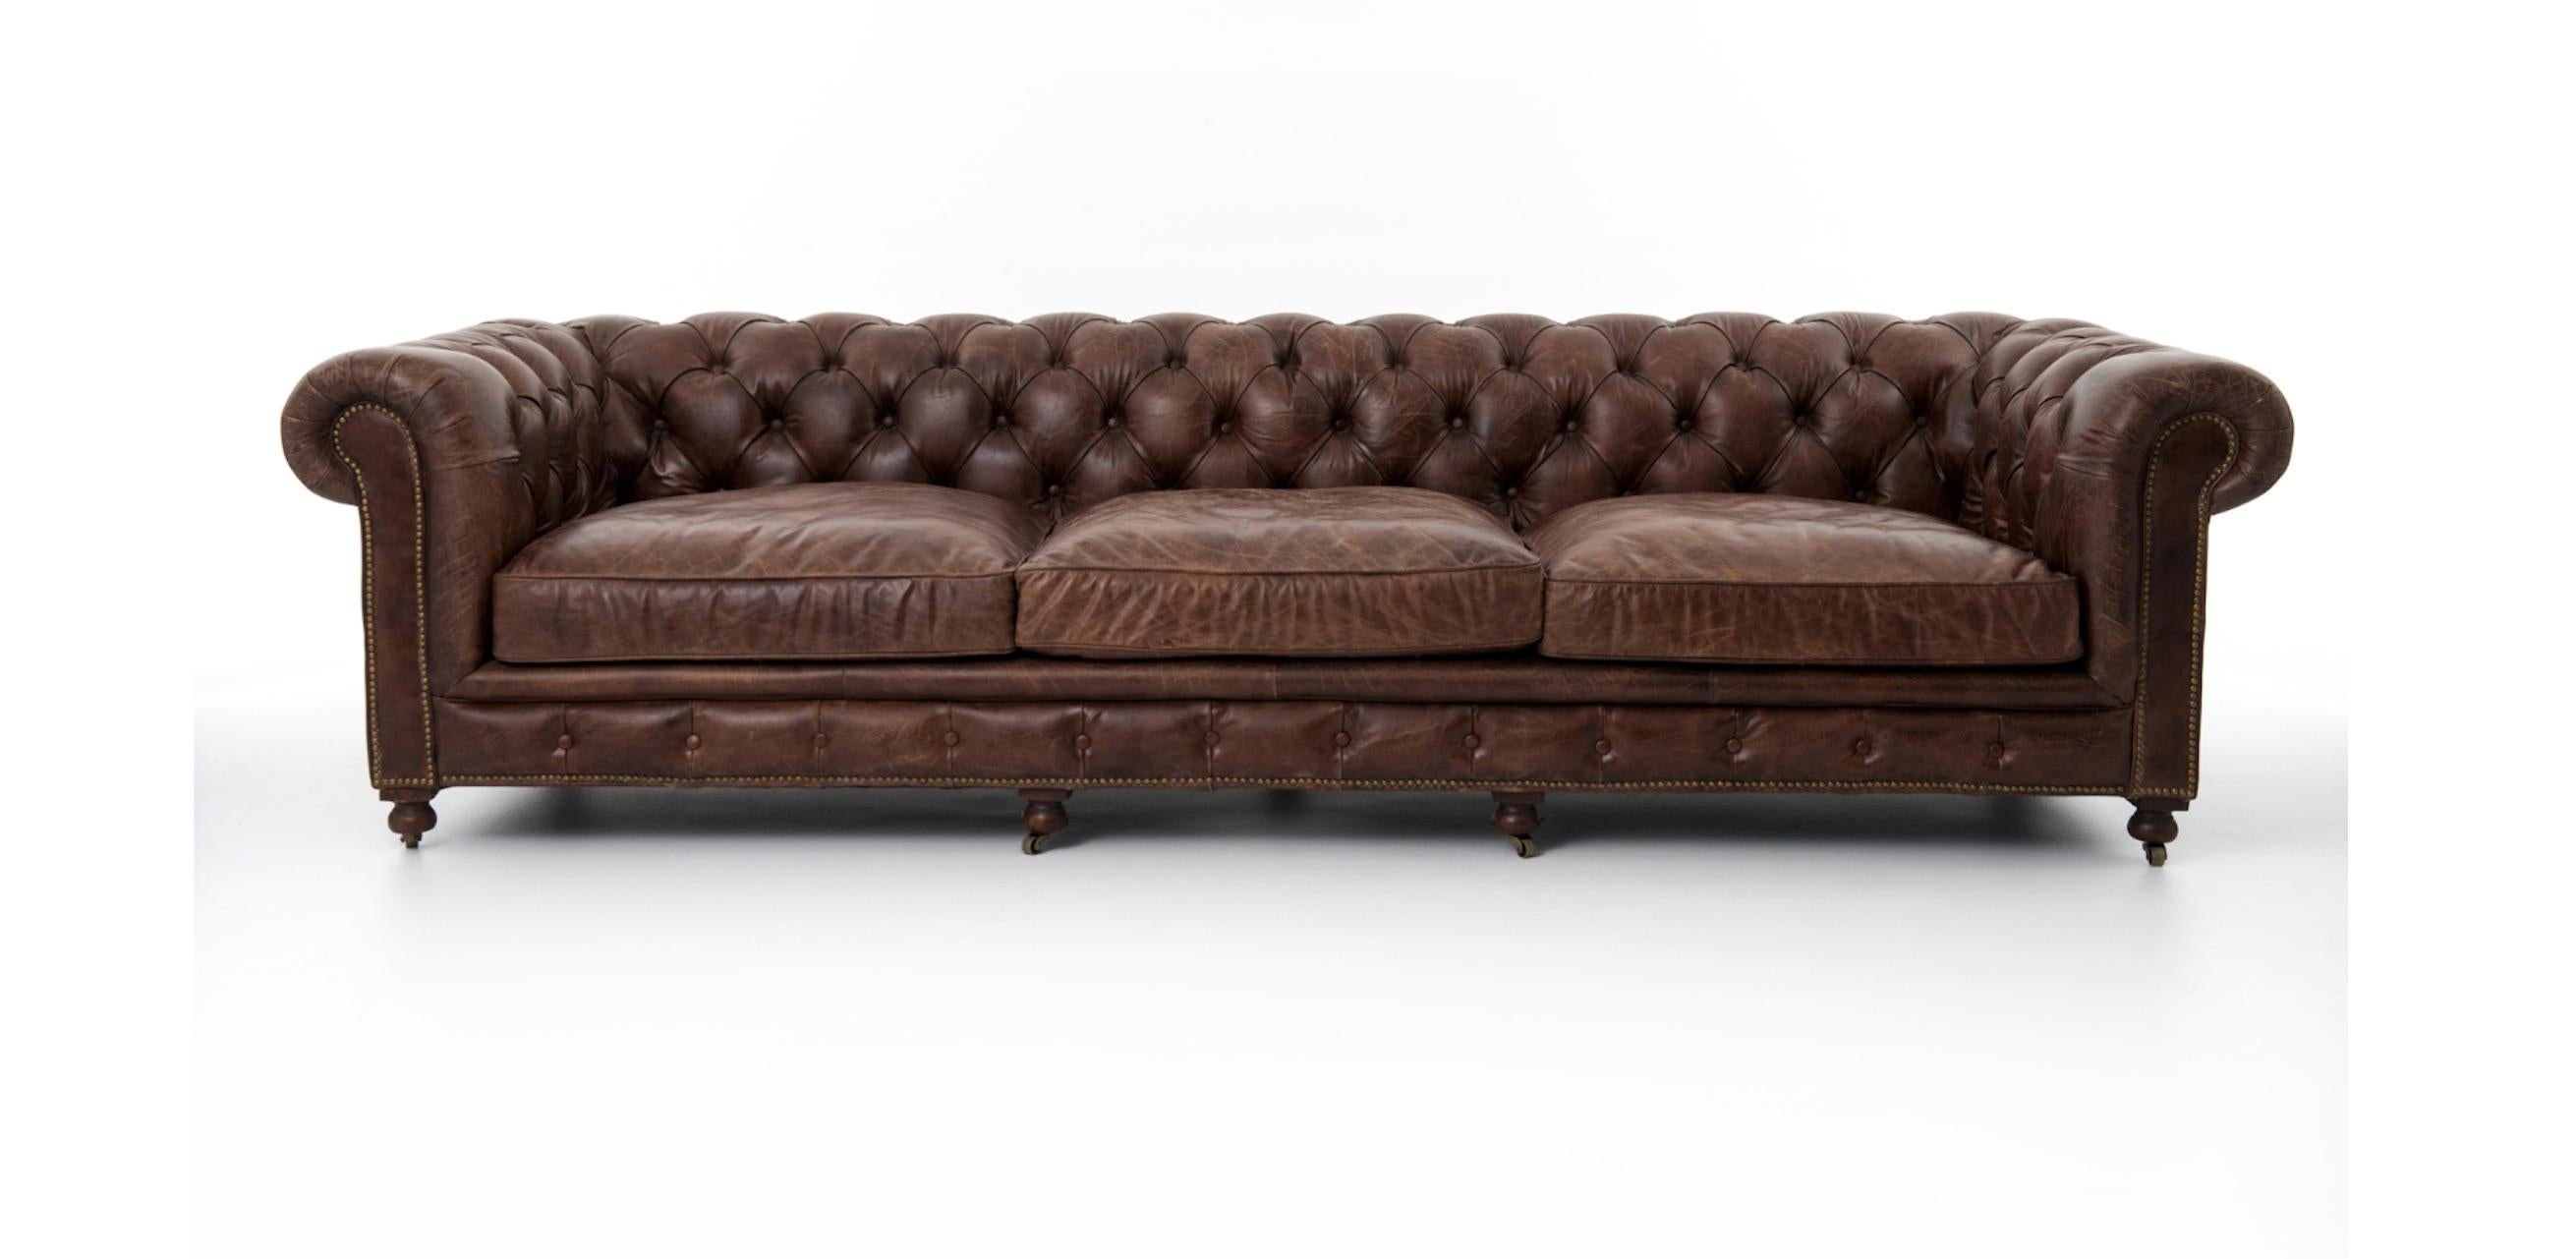 One Pair of Two-Seat Chesterfield Sofa's, Great Scale for Comfort, Great Patina For Sale 3